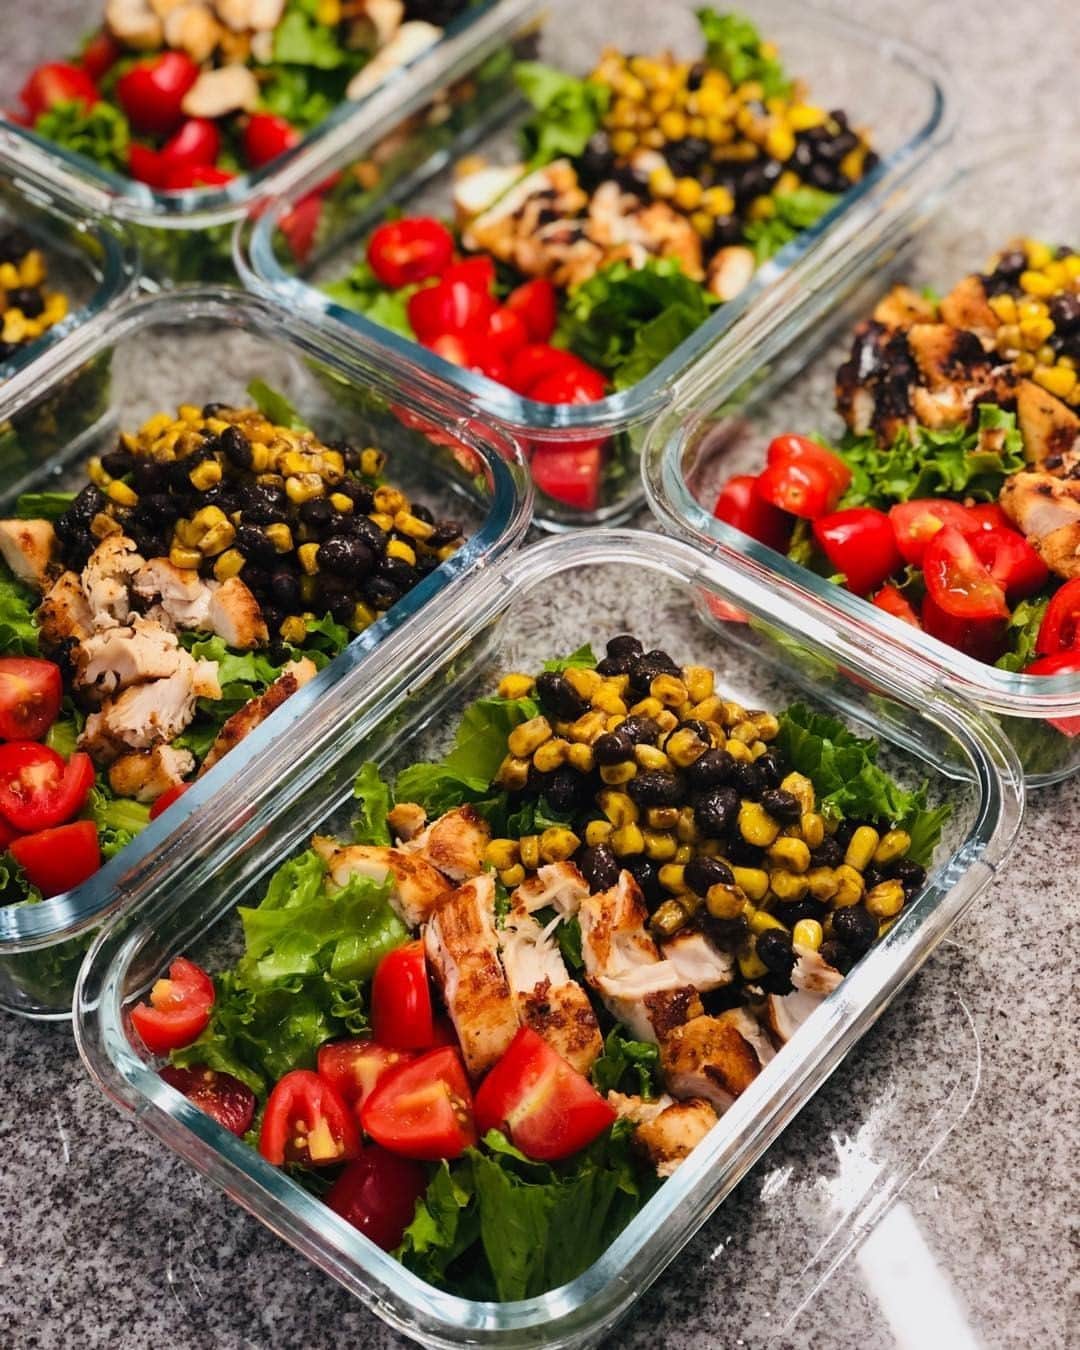 Flavorgod Seasoningsさんのインスタグラム写真 - (Flavorgod SeasoningsInstagram)「Southwest Chipotle Chicken Salad (Perfect For Meal Prep)⁠ -⁠ Customer:👉 @melwade60⁠ Made with:👉 #Flavorgod No Salt Seasoning(Not in stock, Search on website "Everything but the salt"⁠ -⁠ Add delicious flavors to any meal!⬇⁠ Click the link in my bio @flavorgod⁠ ✅www.flavorgod.com⁠ -⁠ 1 large head of green leaf lettuce (or other greens of choice)⁠ 1 pint grape tomatoes, cut in quarters ⁠ 1 can black beans, rinsed ⁠ 3/4 cup frozen sweet corn⁠ 1.5 lbs chicken breast tenderloins⁠ @flavorgod Seasoning: Chipotle, Taco Tuesday, and NO SALT⁠ .⁠ 1. Wash and chop lettuce. Portion into meal prep containers.⁠ 2. Season chicken breasts with Flavor God Chipotle Seasoning and Taco Tuesday Seasoning. Grill each chicken breast for about 9 minutes (I used a George Forman Grill). Set aside to cool. ⁠ 3. Add corn and black beans to preheated non-stick skillet. Season with Flavorgod NO SALT Seasoning. Cook on med-low heat for 5 minutes. ⁠ 4. Add quartered tomatoes to containers. Slice chicken and add to containers. ⁠ 5. Top with dressing of choice (I use Chipotle Ranch).⁠ 6. Makes 5-6 meals. Enjoy!⁠ -⁠ Flavor God Seasonings are:⁠ 💥ZERO CALORIES PER SERVING⁠ 🔥0 SUGAR PER SERVING ⁠ 💥GLUTEN FREE⁠ 🔥KETO FRIENDLY⁠ 💥PALEO FRIENDLY⁠ -⁠ #food #foodie #flavorgod #seasonings #glutenfree #mealprep #seasonings #breakfast #lunch #dinner #yummy #delicious #foodporn」10月29日 1時02分 - flavorgod